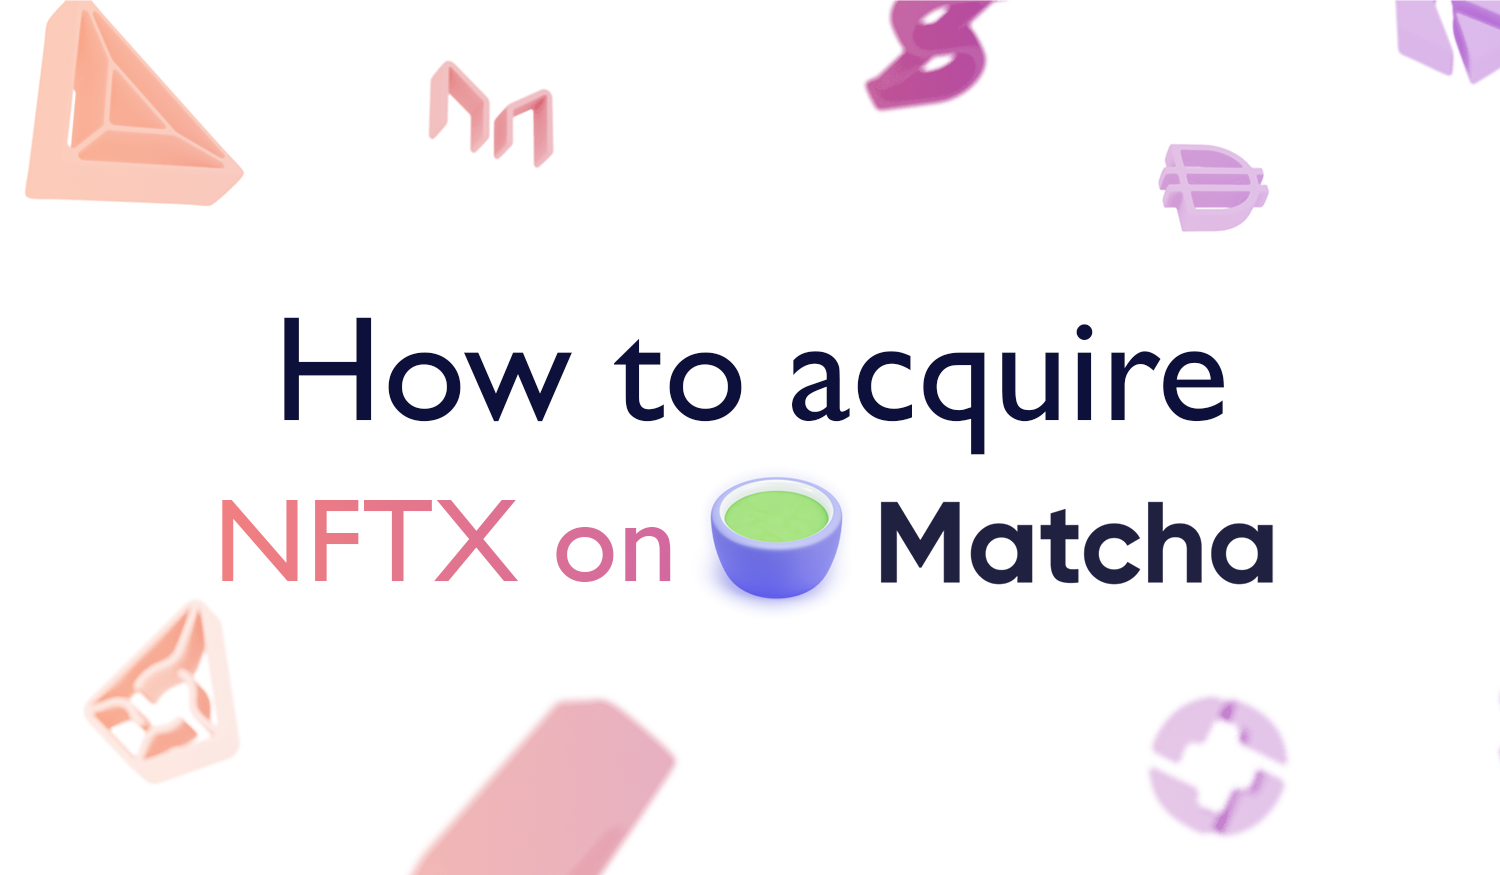 How to acquire NFTX on MATCHA